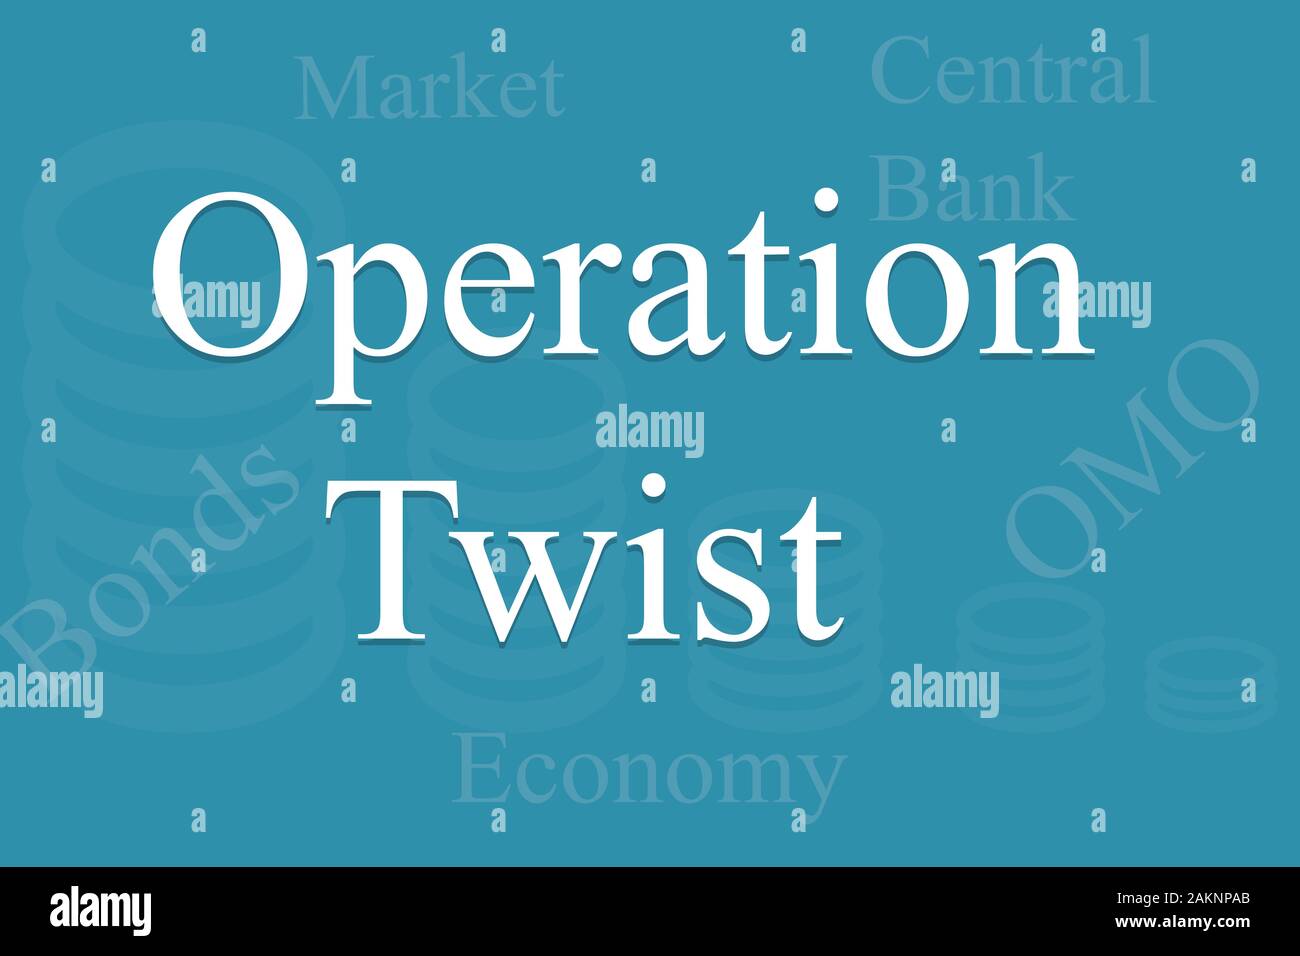 Economic Concept Operation Twist with Bonds, Market, OMO or Open Market Operations, Central bank on blue background. Stock Photo